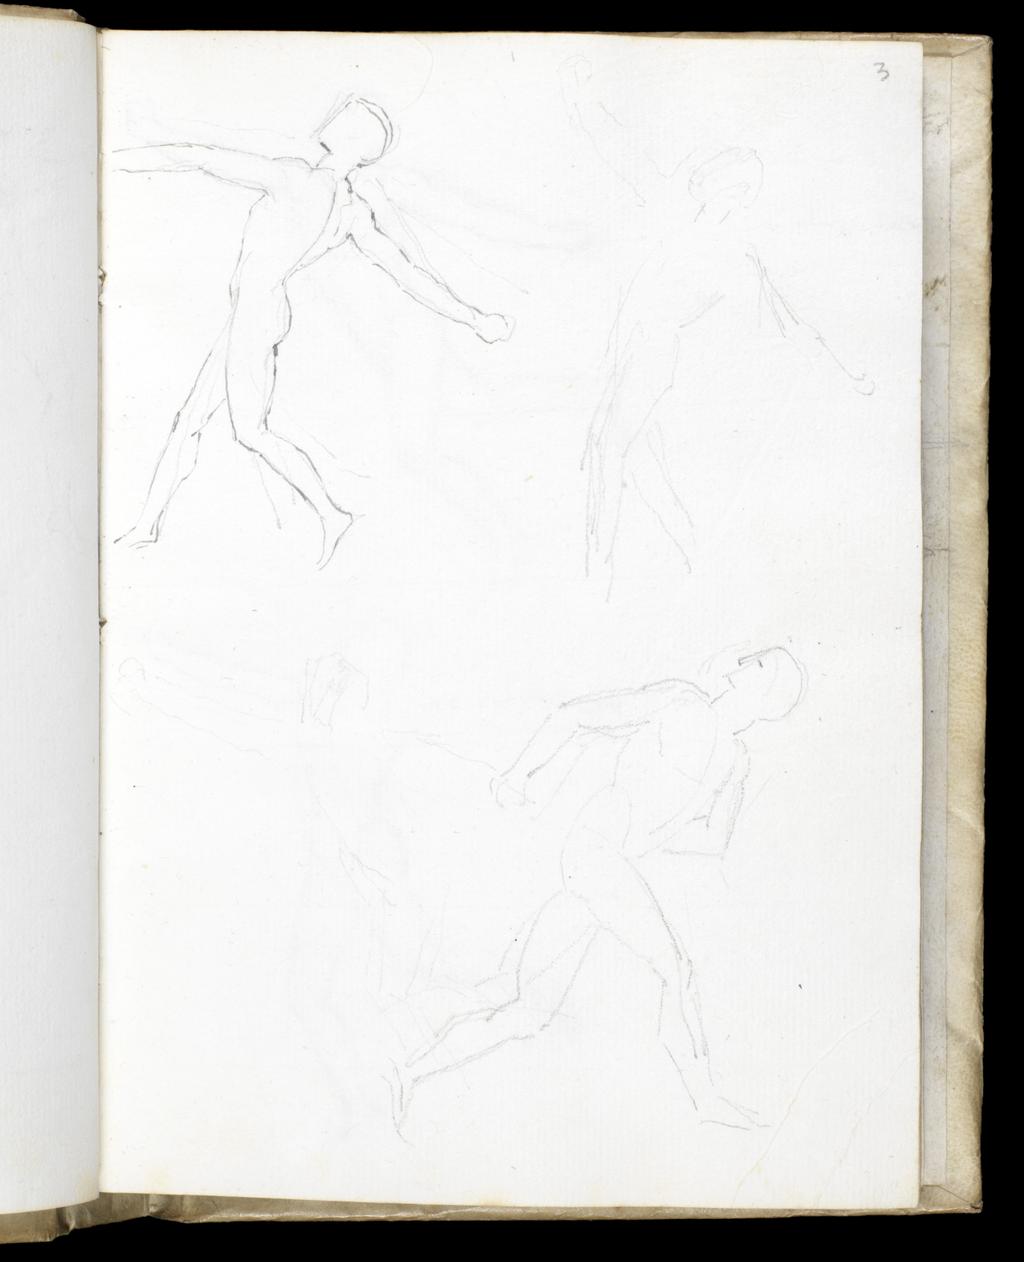 An image of Sketchbook. Flaxman, John (British, 1755-1826). Vellum bound sketchbook containing 28 leaves. Three leaves have been cut out and are loose. Front cover bears traces of graphite (black ink?) illustration, and has a flap which may be closed to protect the edges of the leaves. Many leaves have apparently been removed, including the following: 1 following f.1, 4 following f.12 and 1 following f.16. Cuts on the versos of f.24 and f.25 indicate leaves removed following f.25.